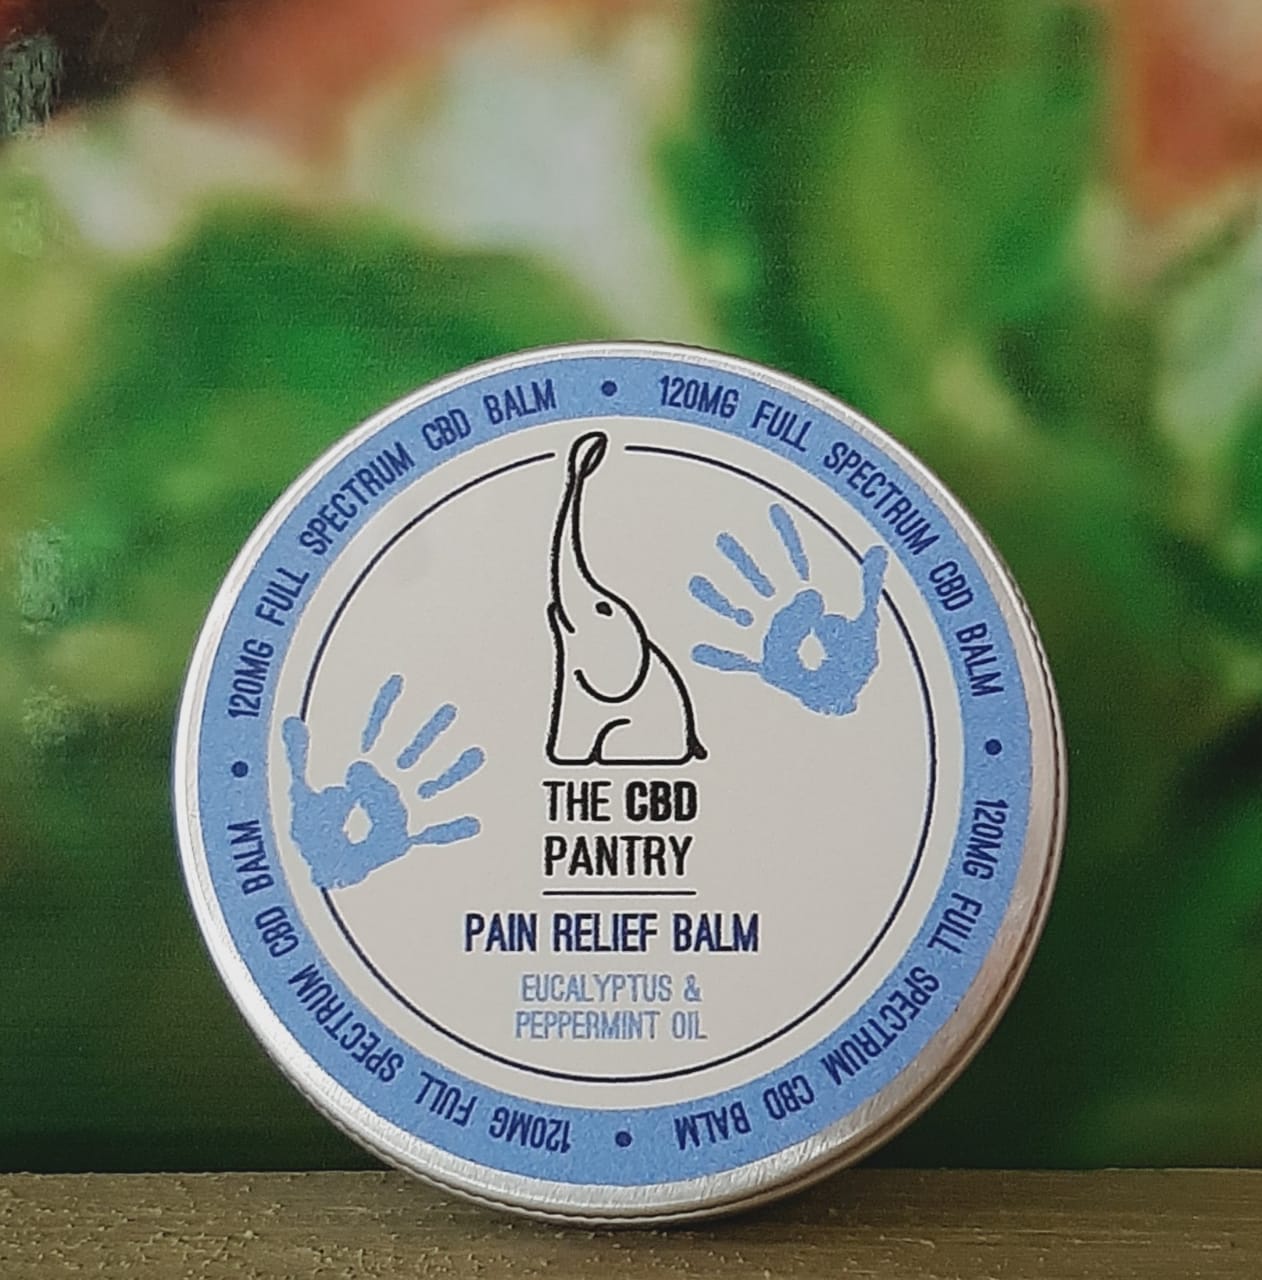 The CBD Pantry Pain Relief Balm 60g